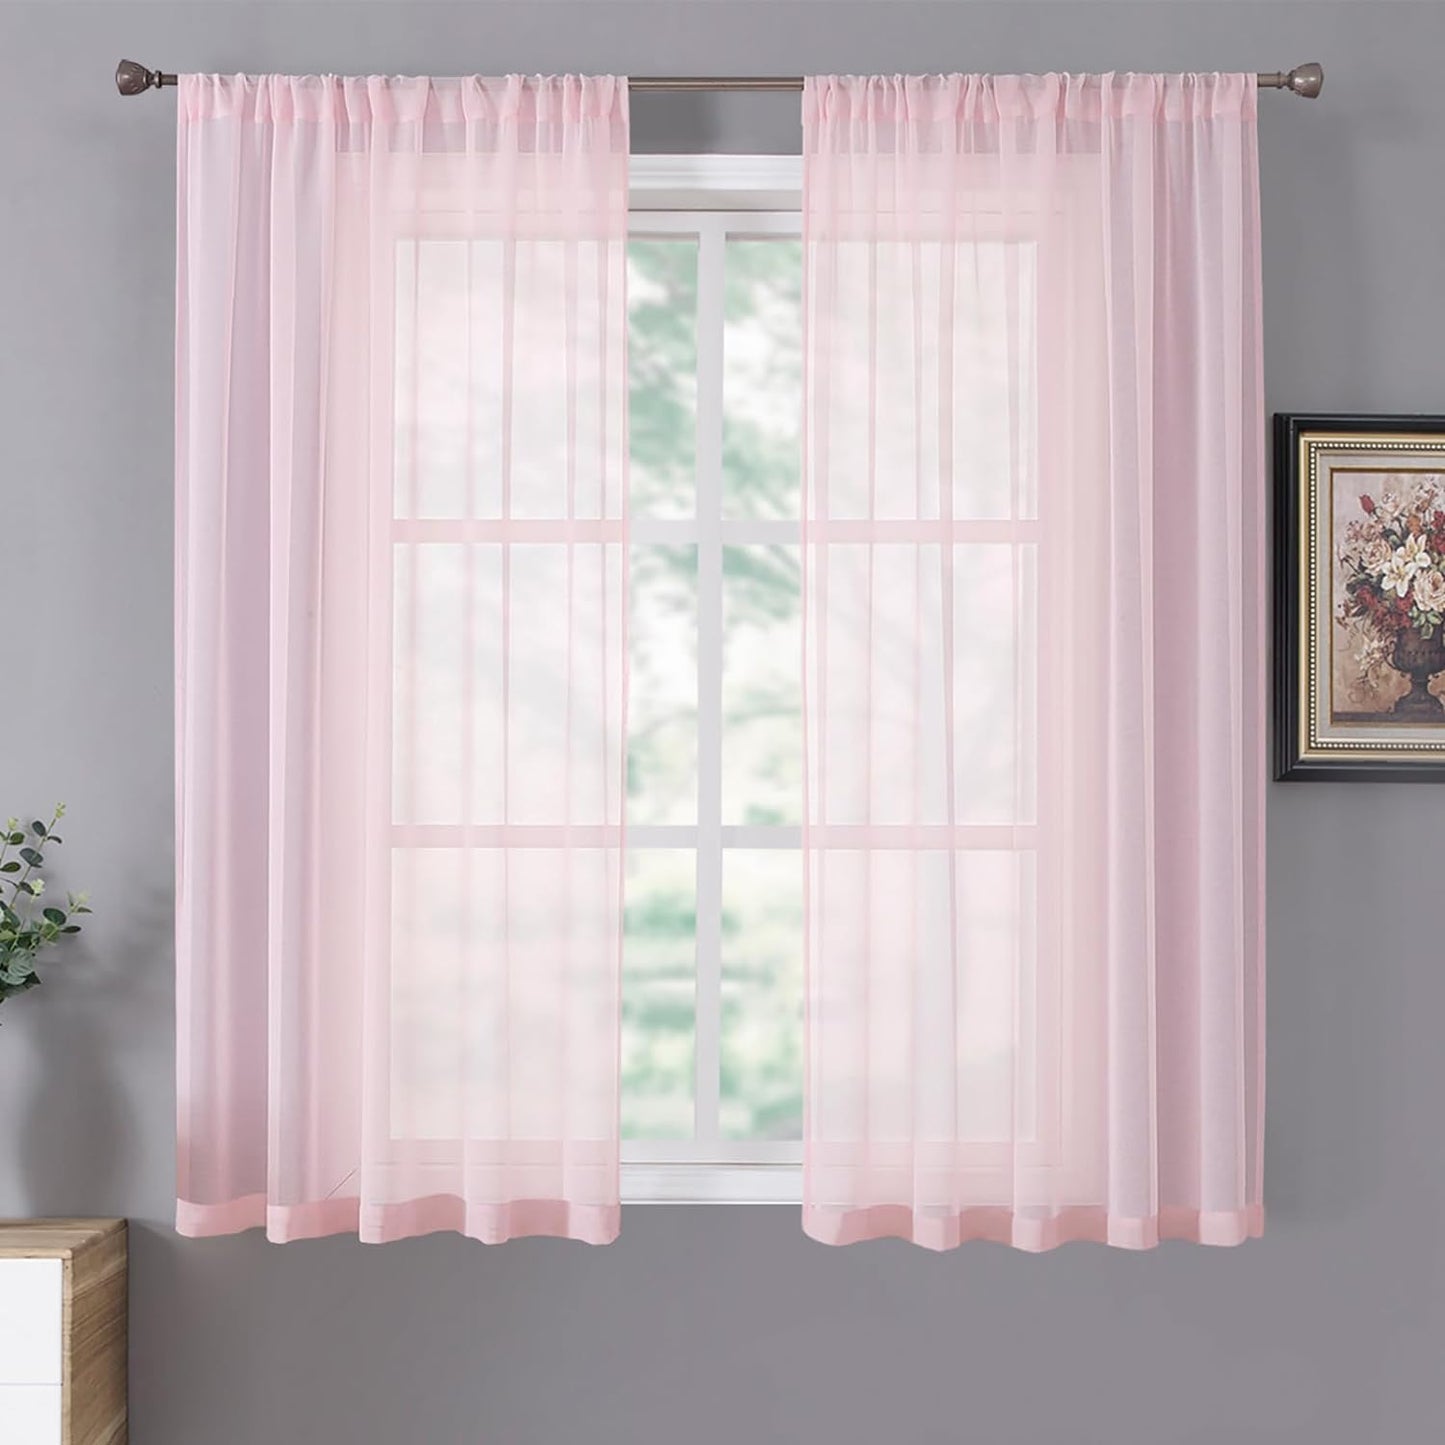 Tollpiz Short Sheer Curtains Linen Textured Bedroom Curtain Sheers Light Filtering Rod Pocket Voile Curtains for Living Room, 54 X 45 Inches Long, White, Set of 2 Panels  Tollpiz Tex Pink 42"W X 54"L 